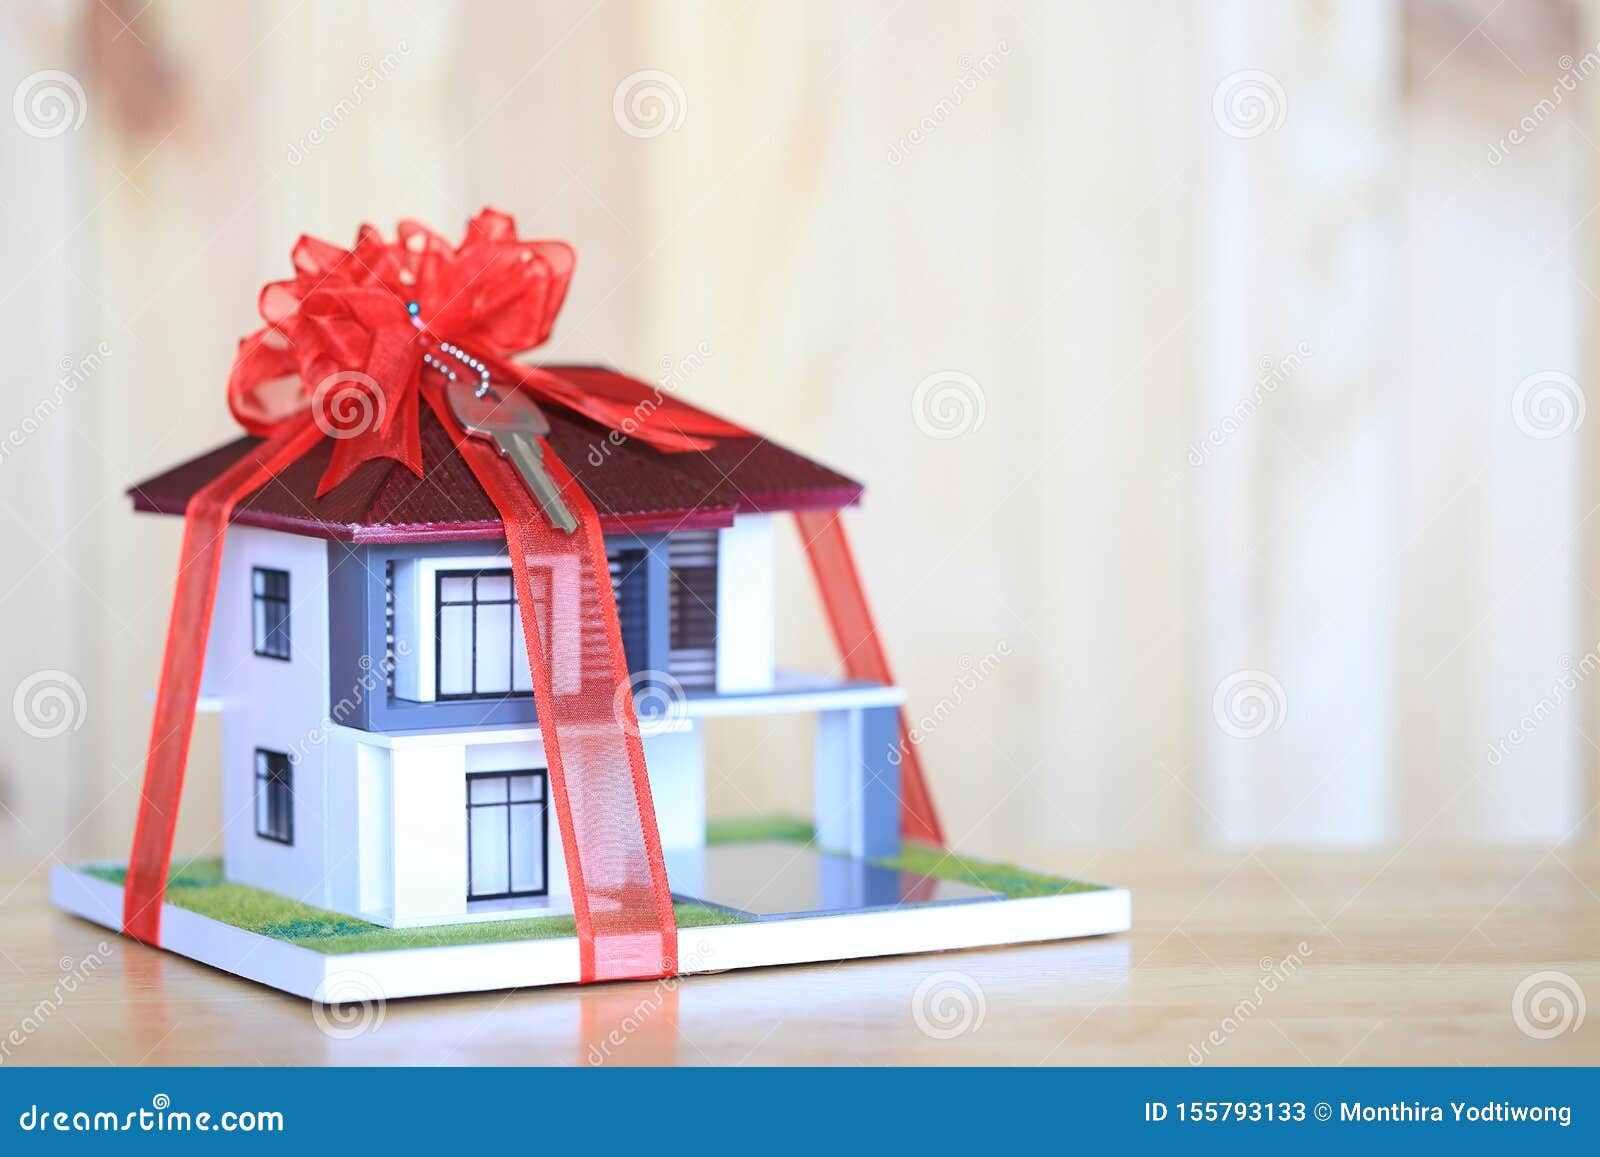 Model Of A House In Gift Box With Red Ribbon Stock Photo, Picture and  Royalty Free Image. Image 53249624.